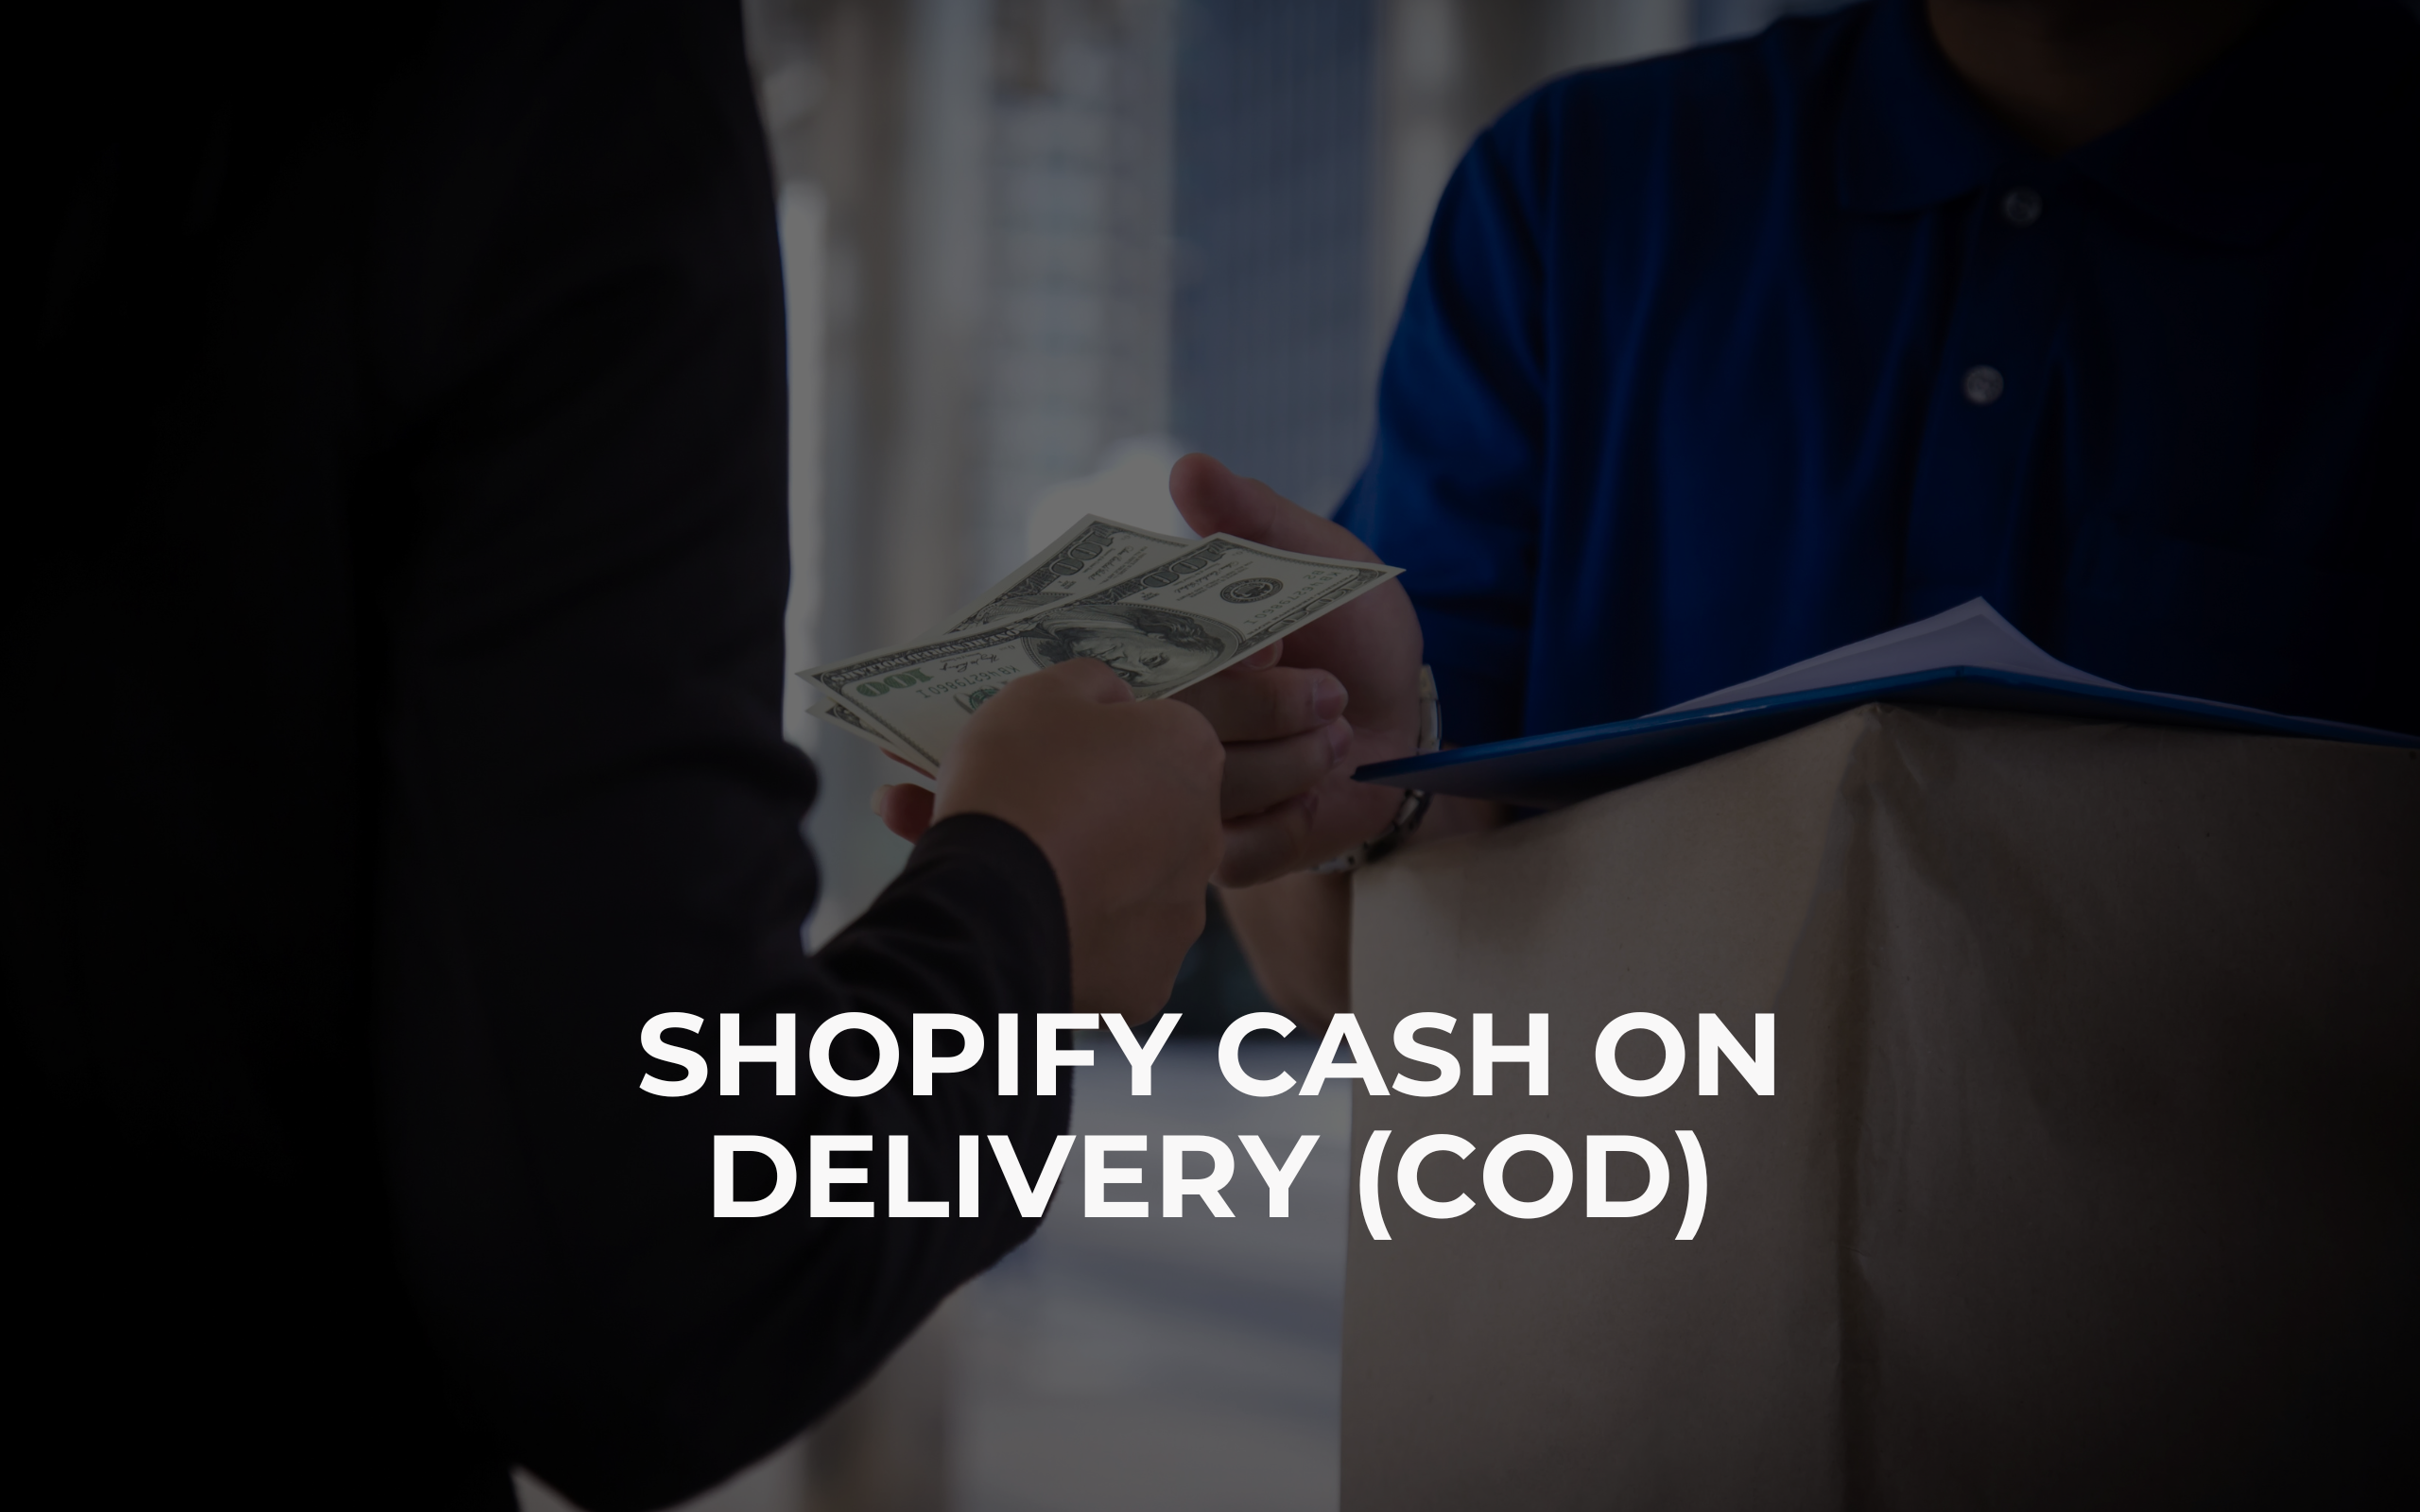 cash on delivery, shopify, handing money